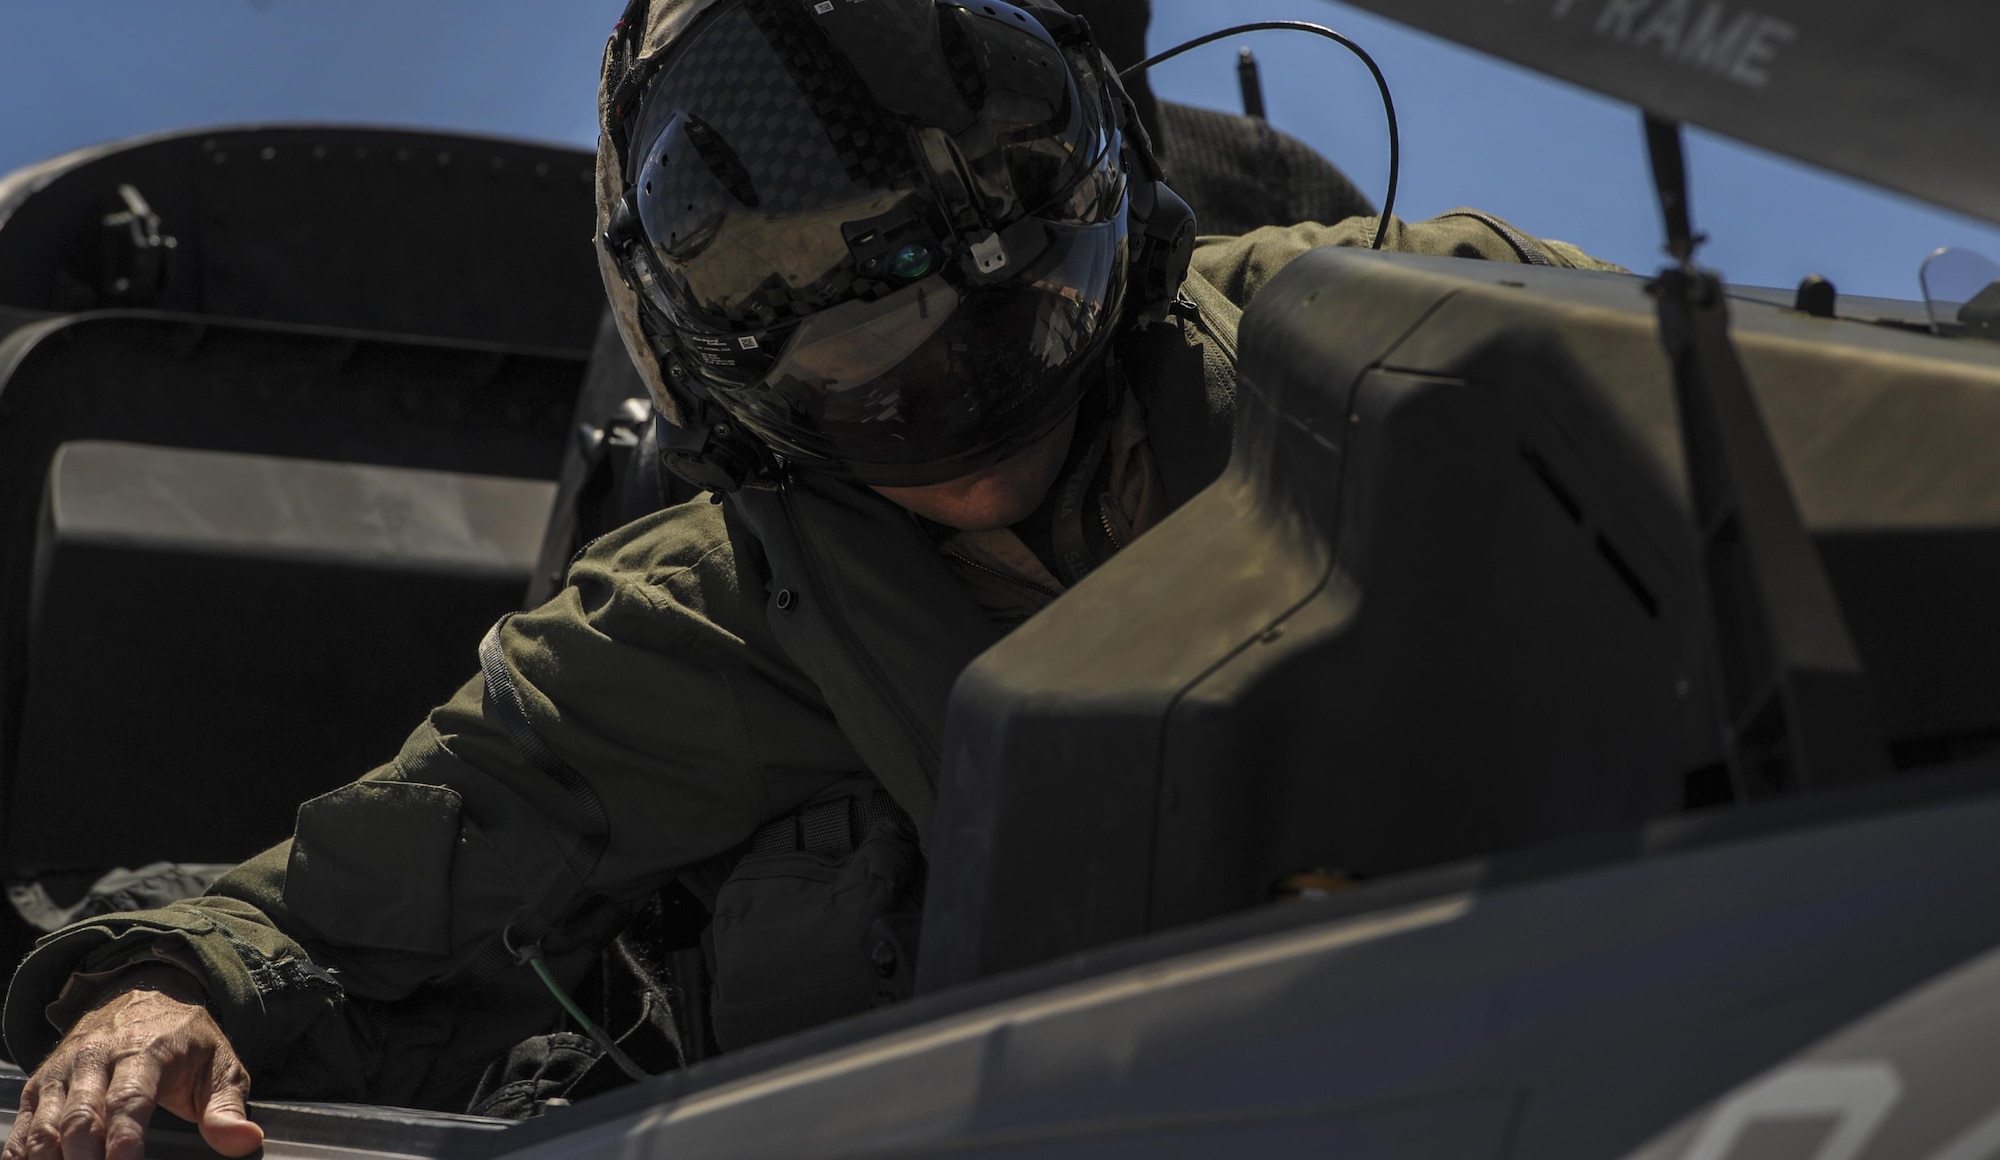 A Marine F-35B pilot, assigned to the 3rd Marine Aircraft Wing, Marine Corps Air Station Yuma, Az., preforms pre-flight inspections to his aircraft before take-off during Red Flag 16-3 at Nellis Air Force Base, Nev., July 12, 2016. Red Flag missions are conducted on the 2.9 million acres Nevada Test and Training Range with 1,900 possible targets, realistic threat systems and opposing enemy forces. (U.S. Air Force photo by Airman 1st Class Kevin Tanenbaum)